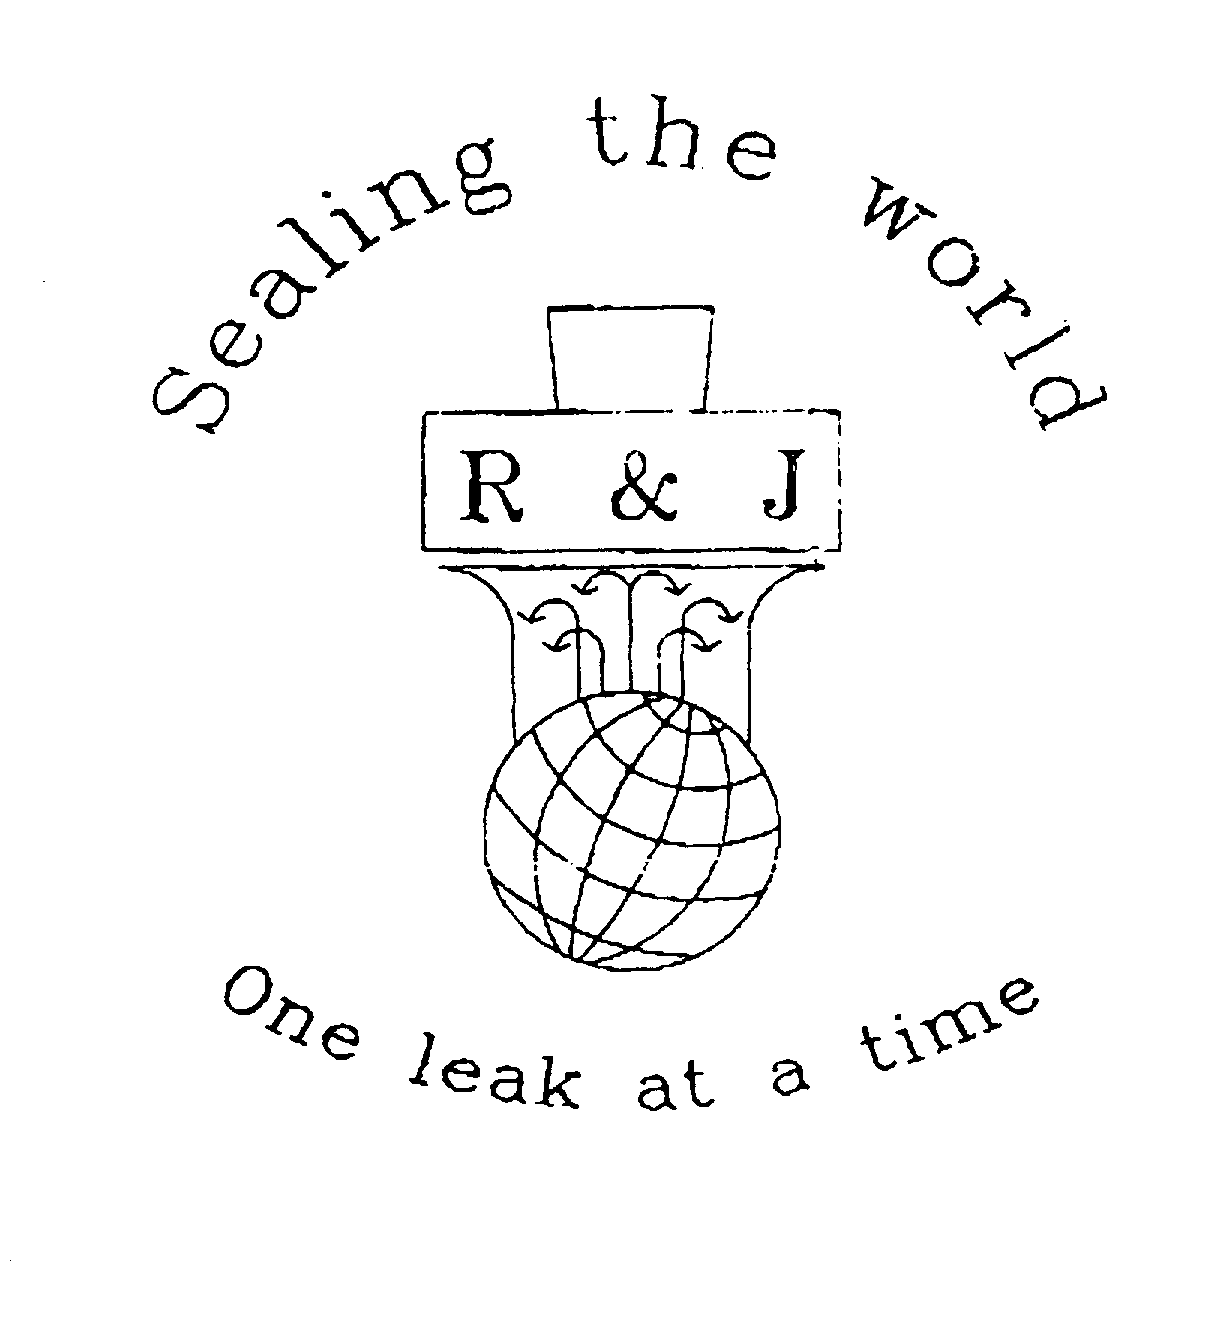  SEALING THE WORLD ONE LEAK AT A TIME R &amp; J